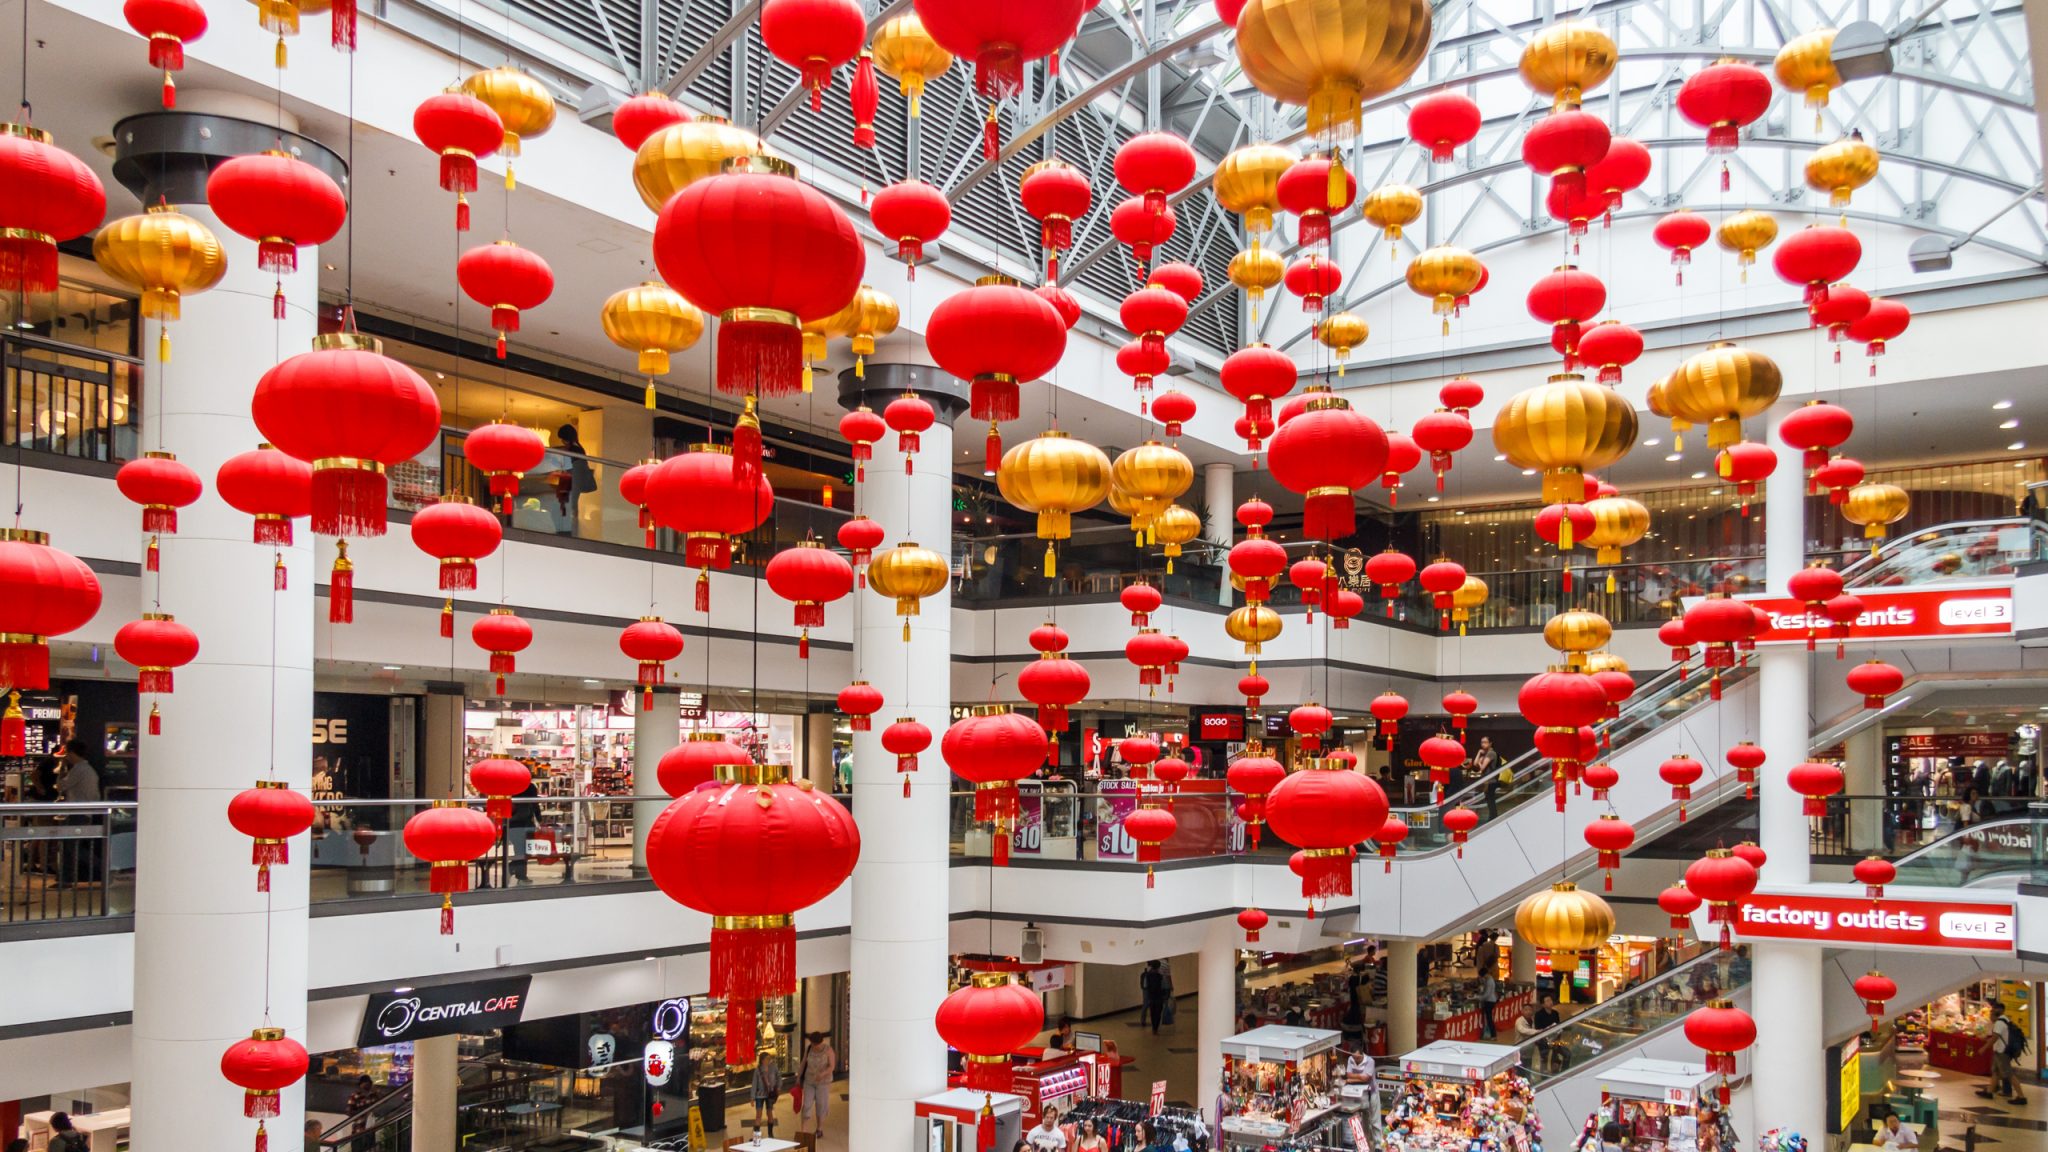 Sydney, Australia - March 15th 2013: Chinese lanterns inside the Market City shopping complex in Chinatown. The centre is located in Haymarket. Lunar New Year